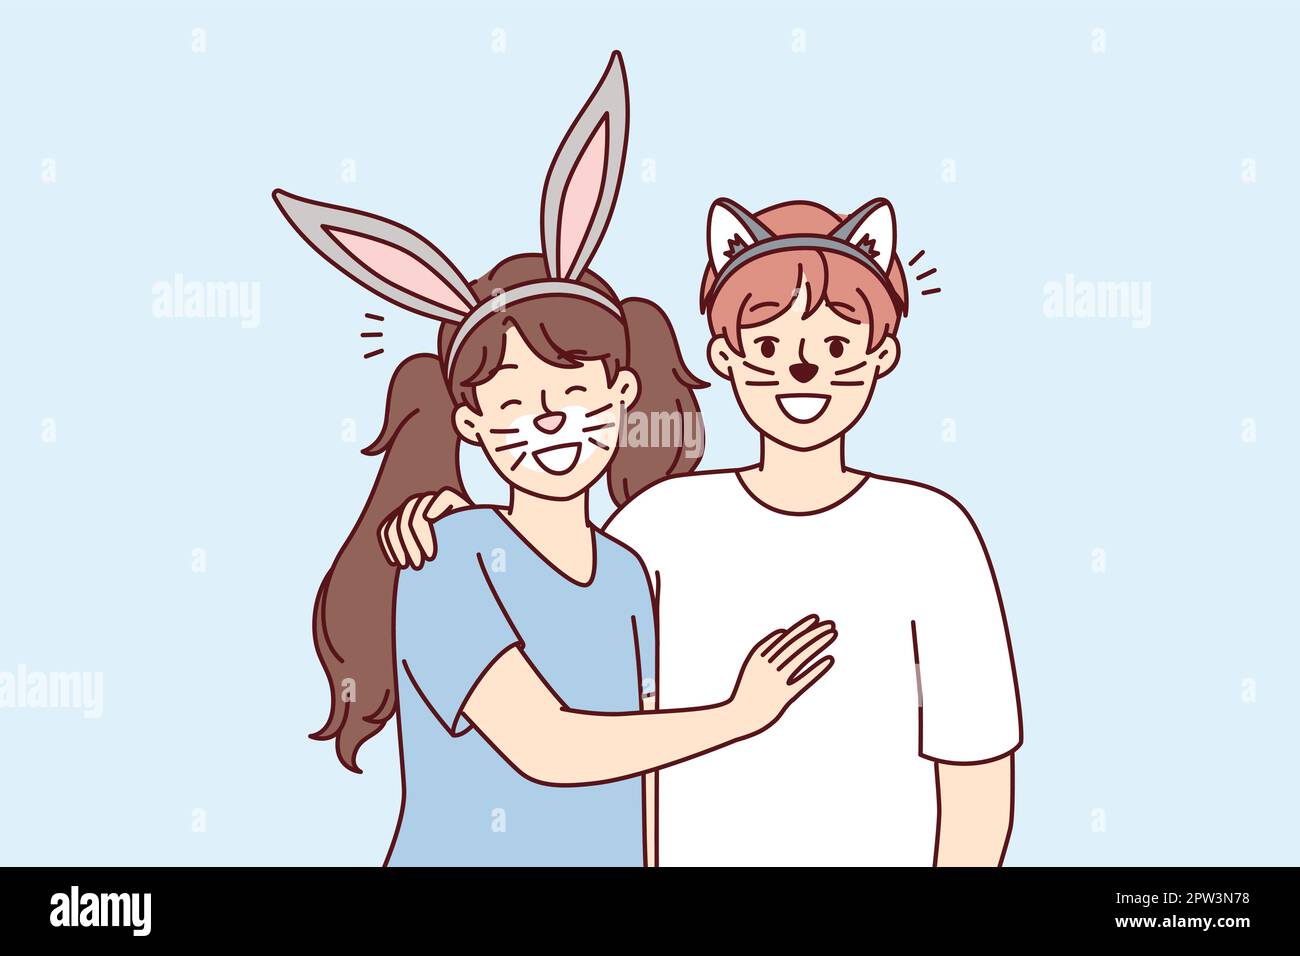 Boy and girl with animal ears and painted mustaches on faces for school masquerade. Vector image Stock Vector